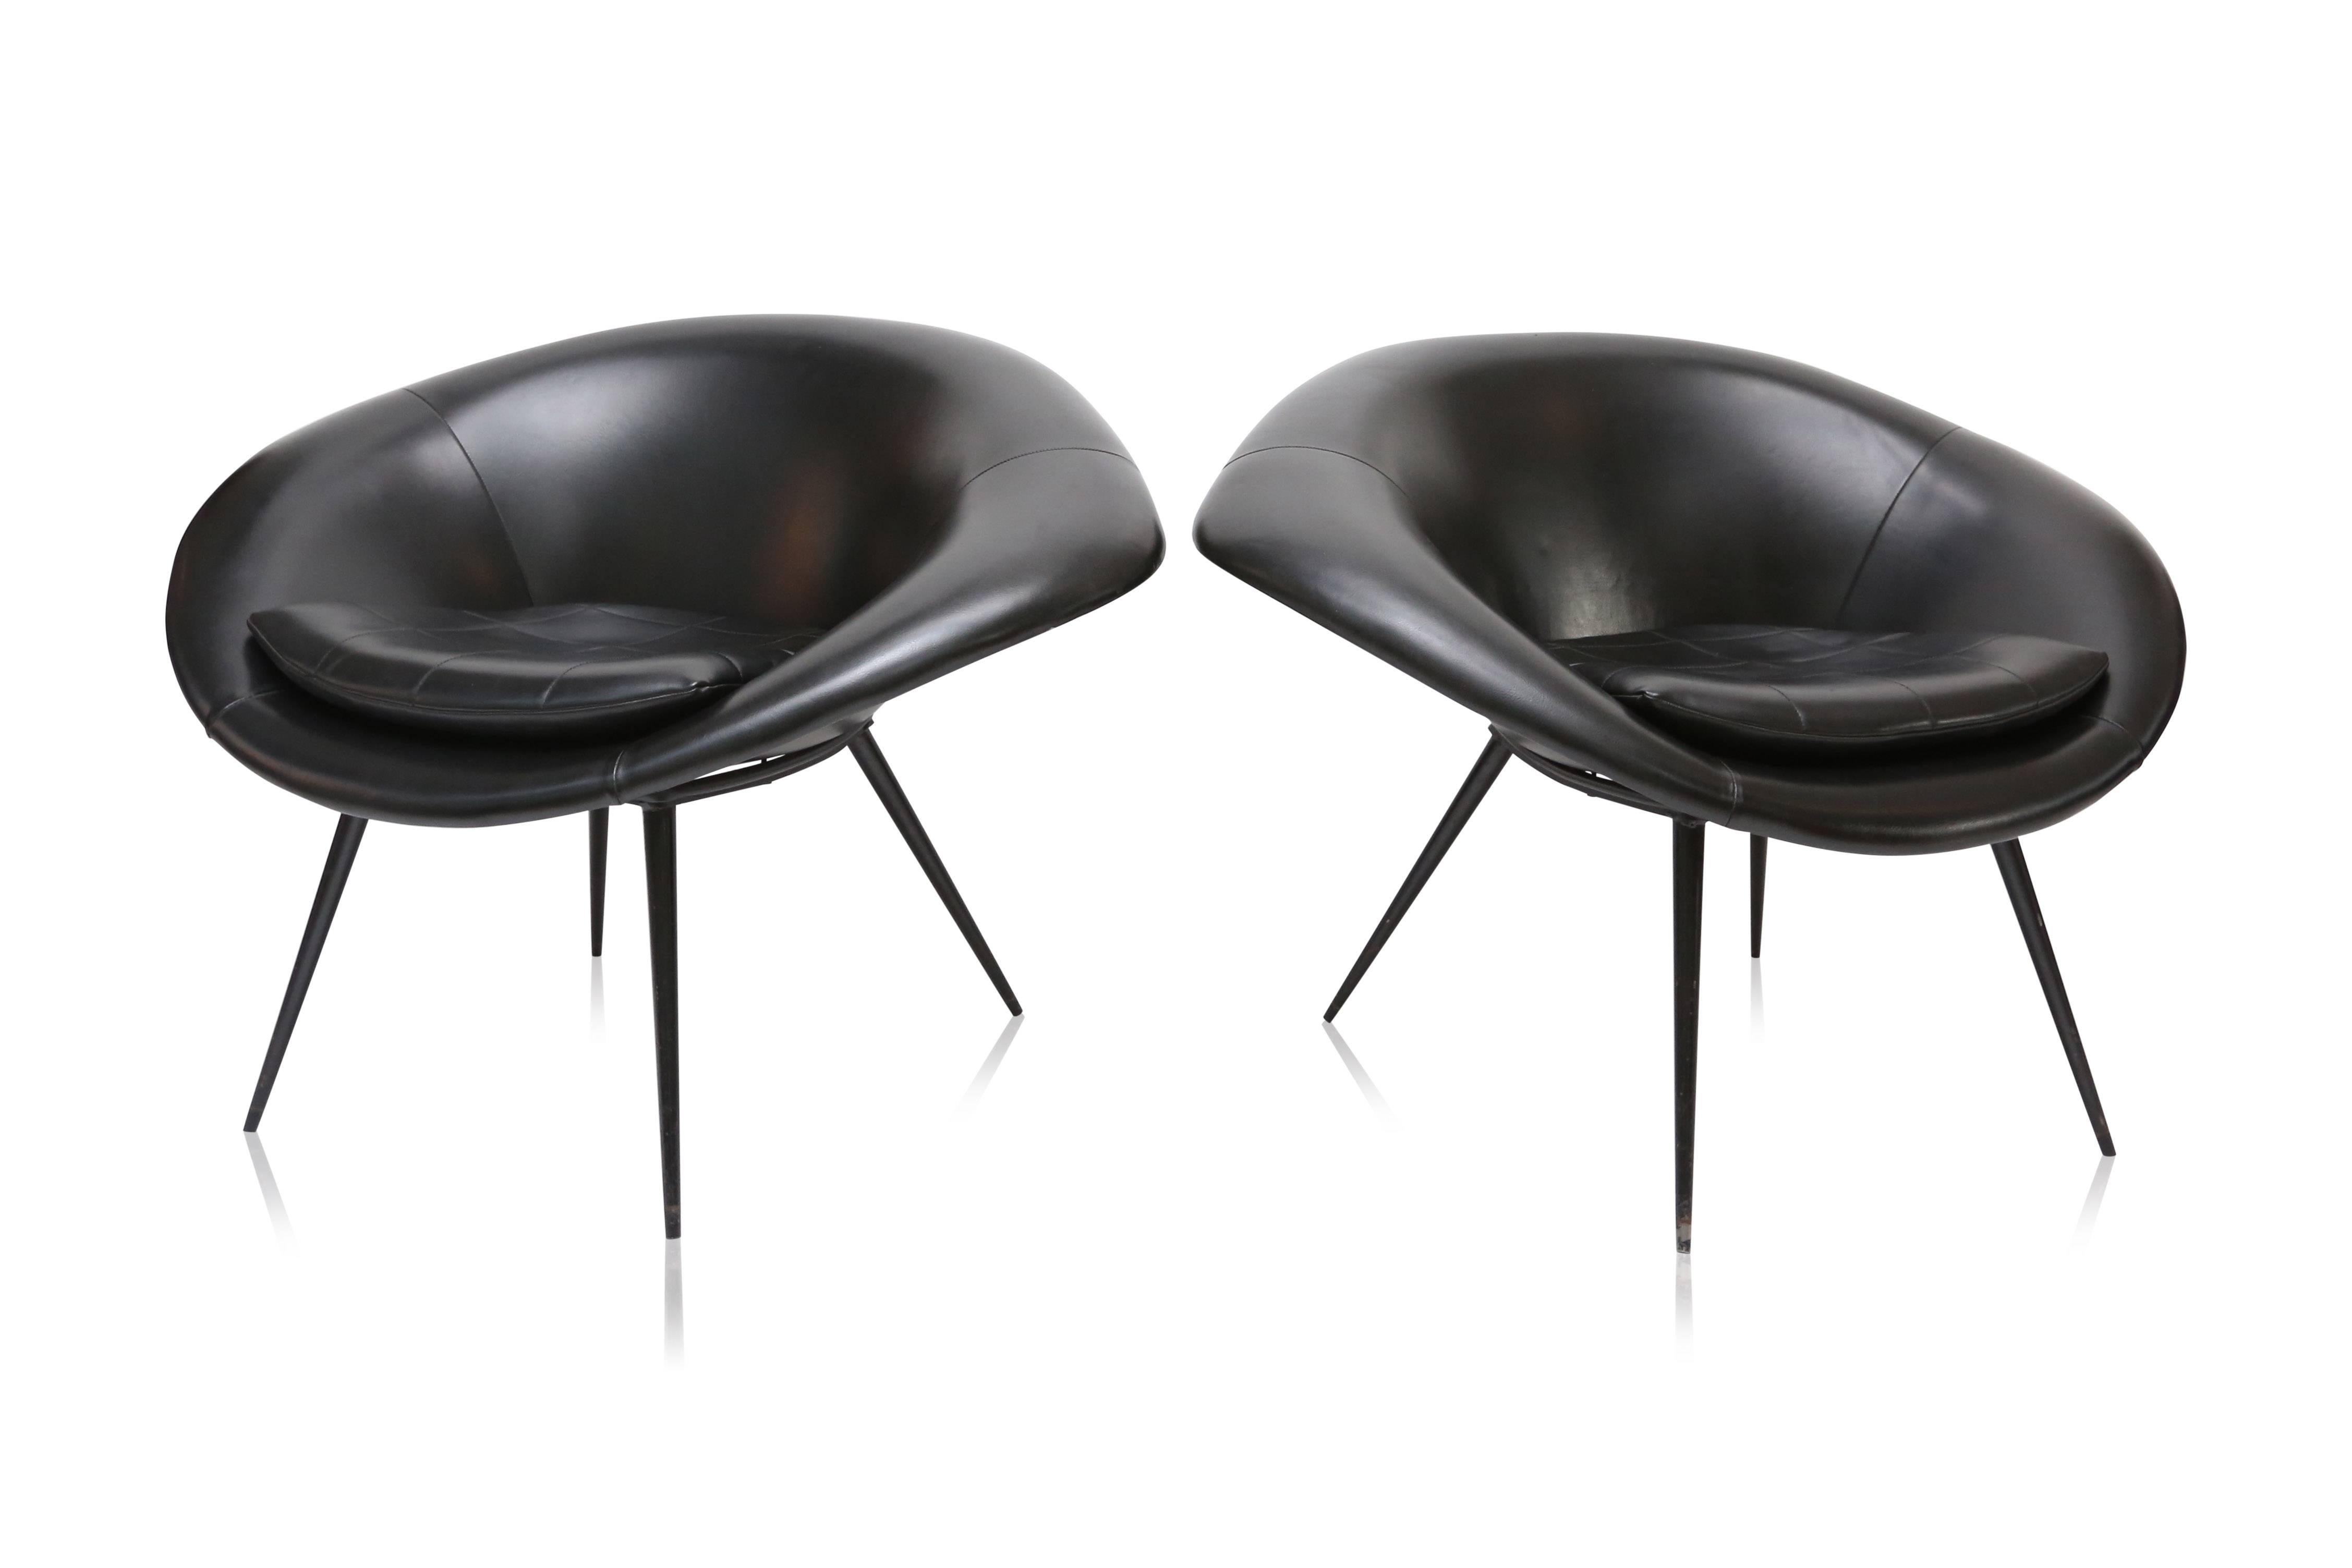 French Mid-century modern vintage Pierre Guariche Space Age Oyster Chairs